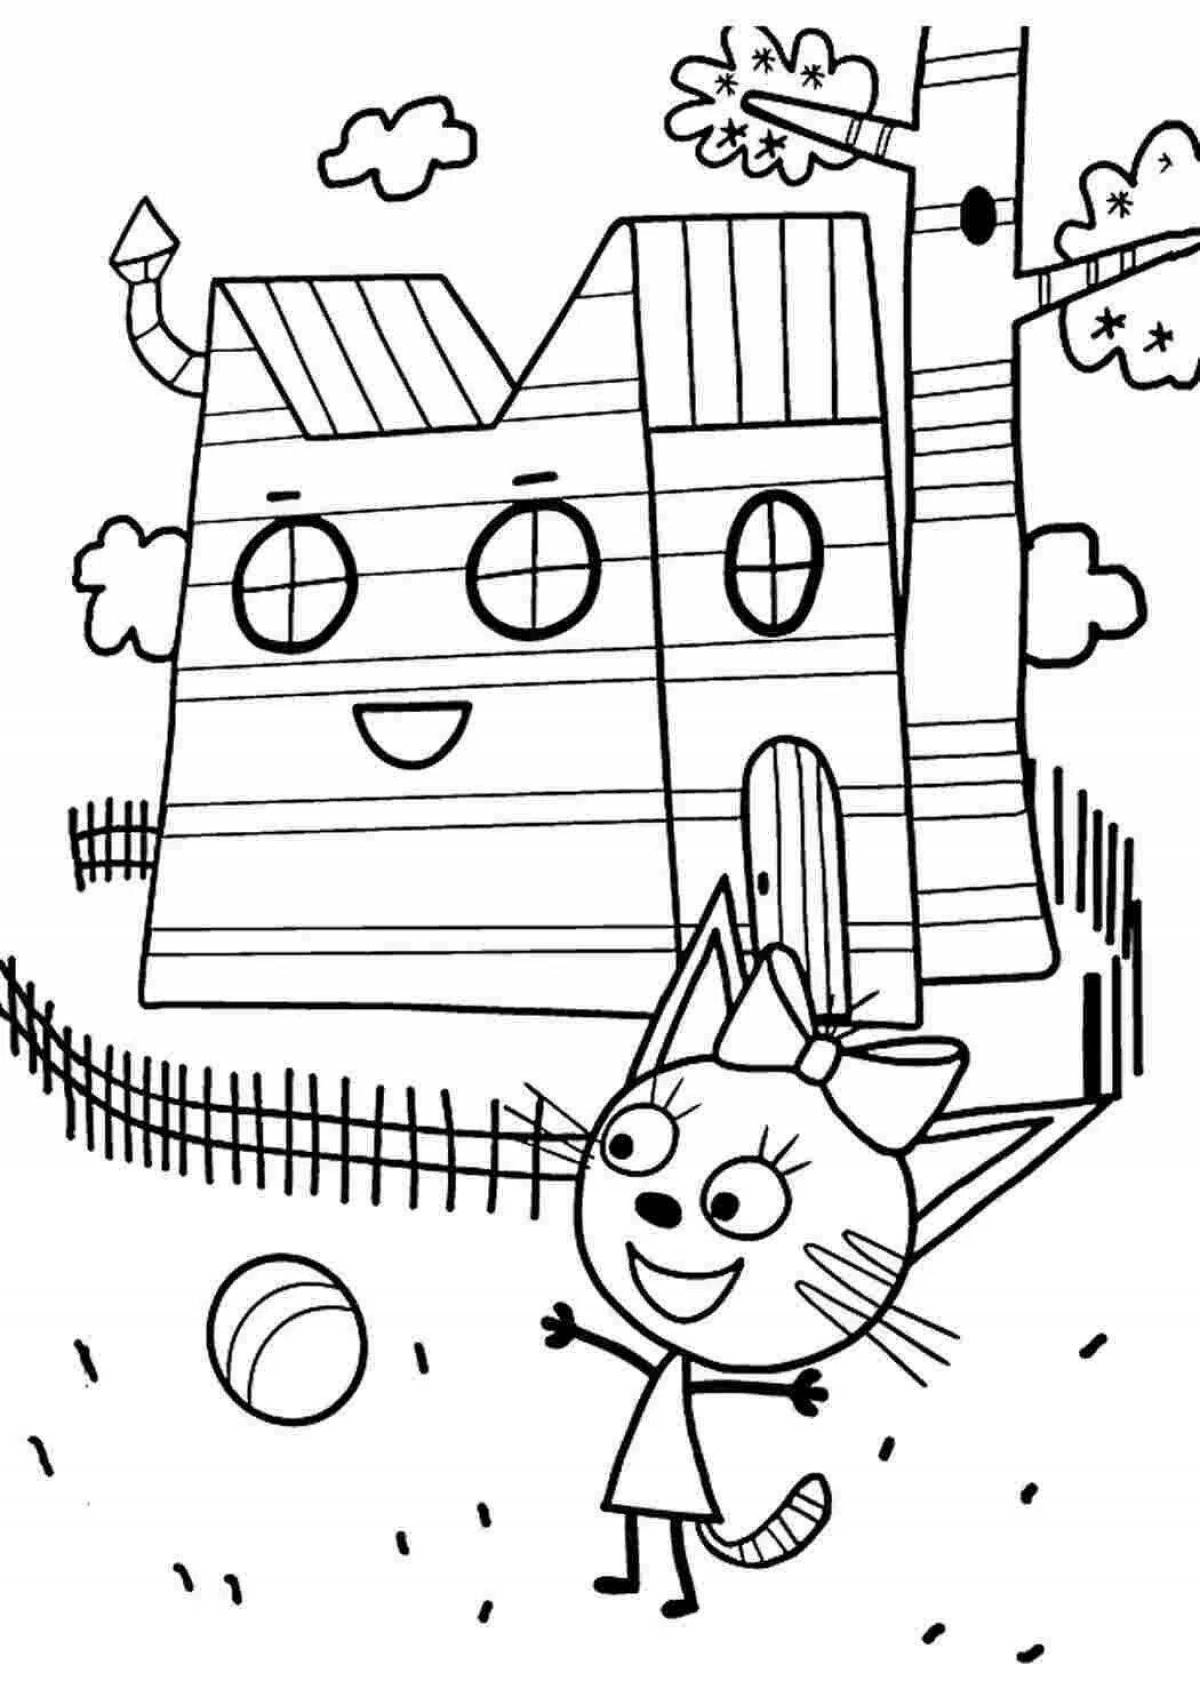 Sweet 3 cats coloring book for kids